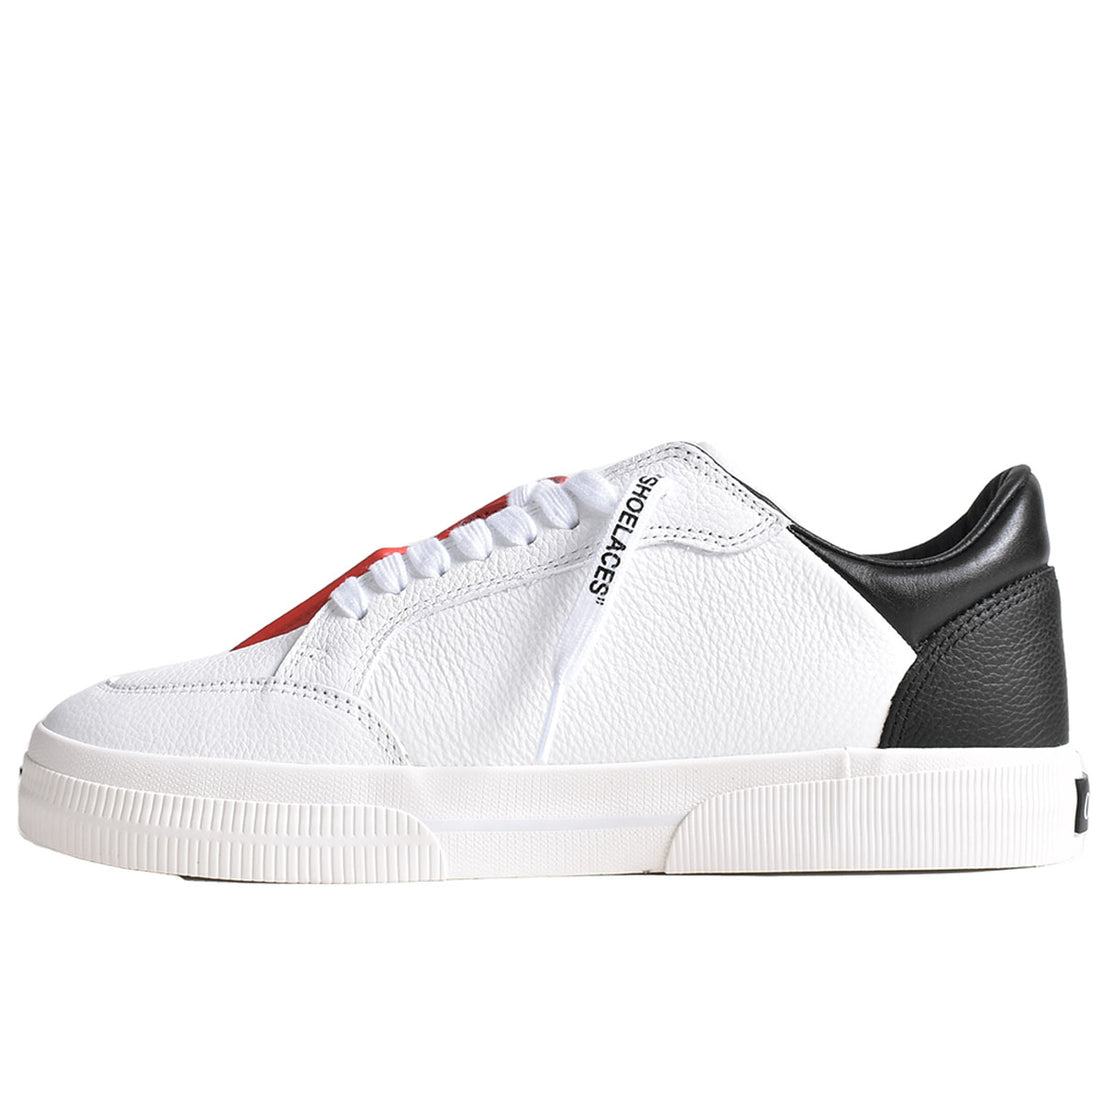 [Off-White]NEW LOW VULCANIZE CALF LEATHER/WHITE BLACK(OMIR24-SLG0120)